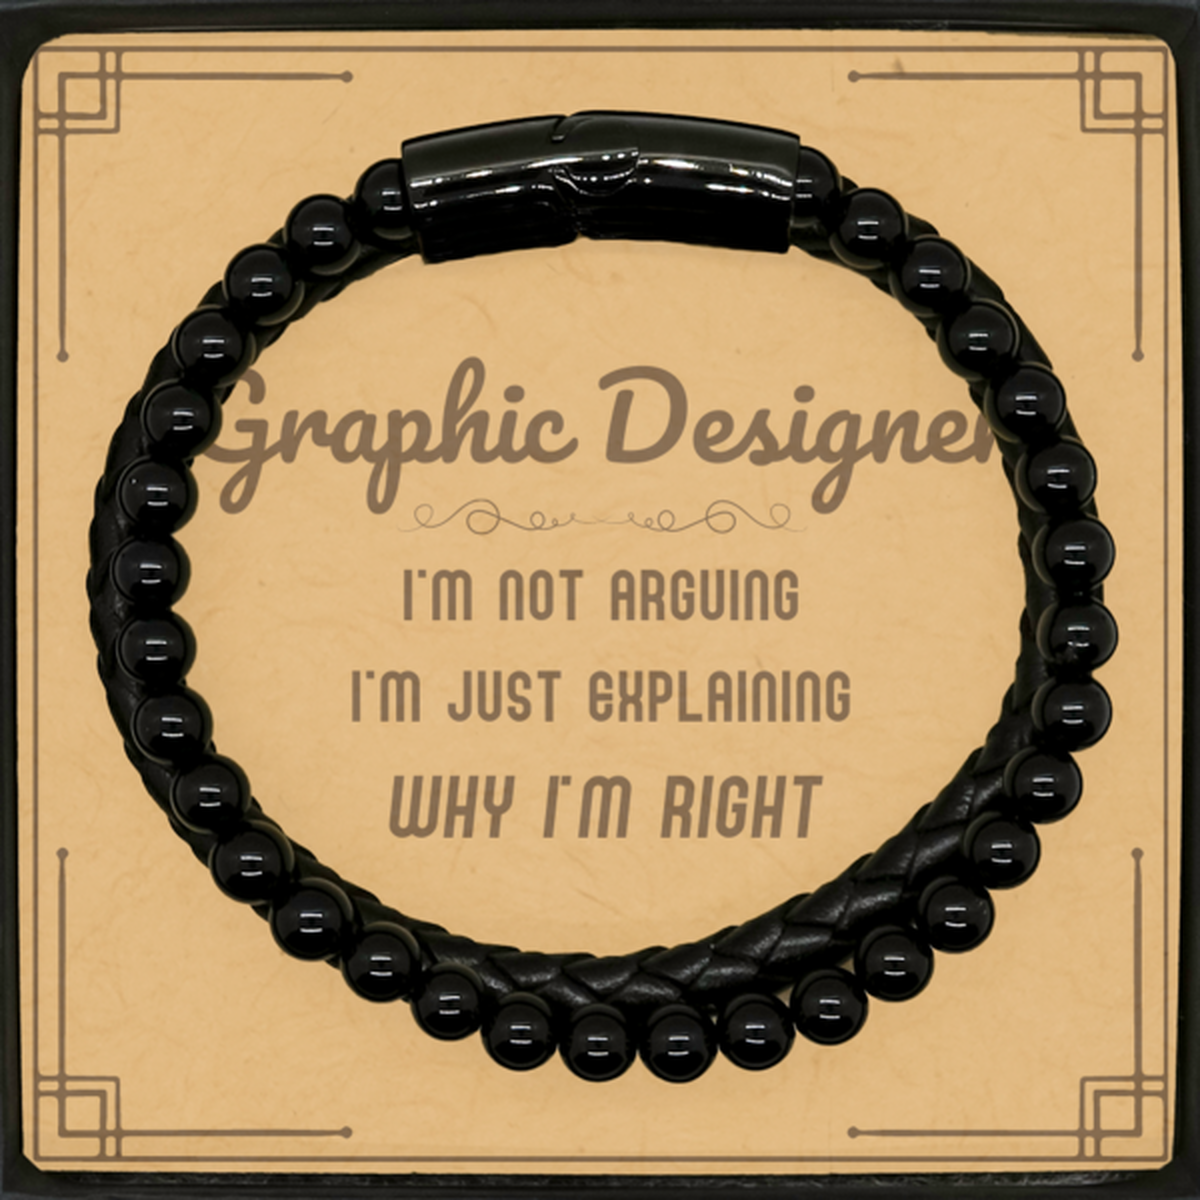 Graphic Designer I'm not Arguing. I'm Just Explaining Why I'm RIGHT Stone Leather Bracelets, Funny Saying Quote Graphic Designer Gifts For Graphic Designer Message Card Graduation Birthday Christmas Gifts for Men Women Coworker